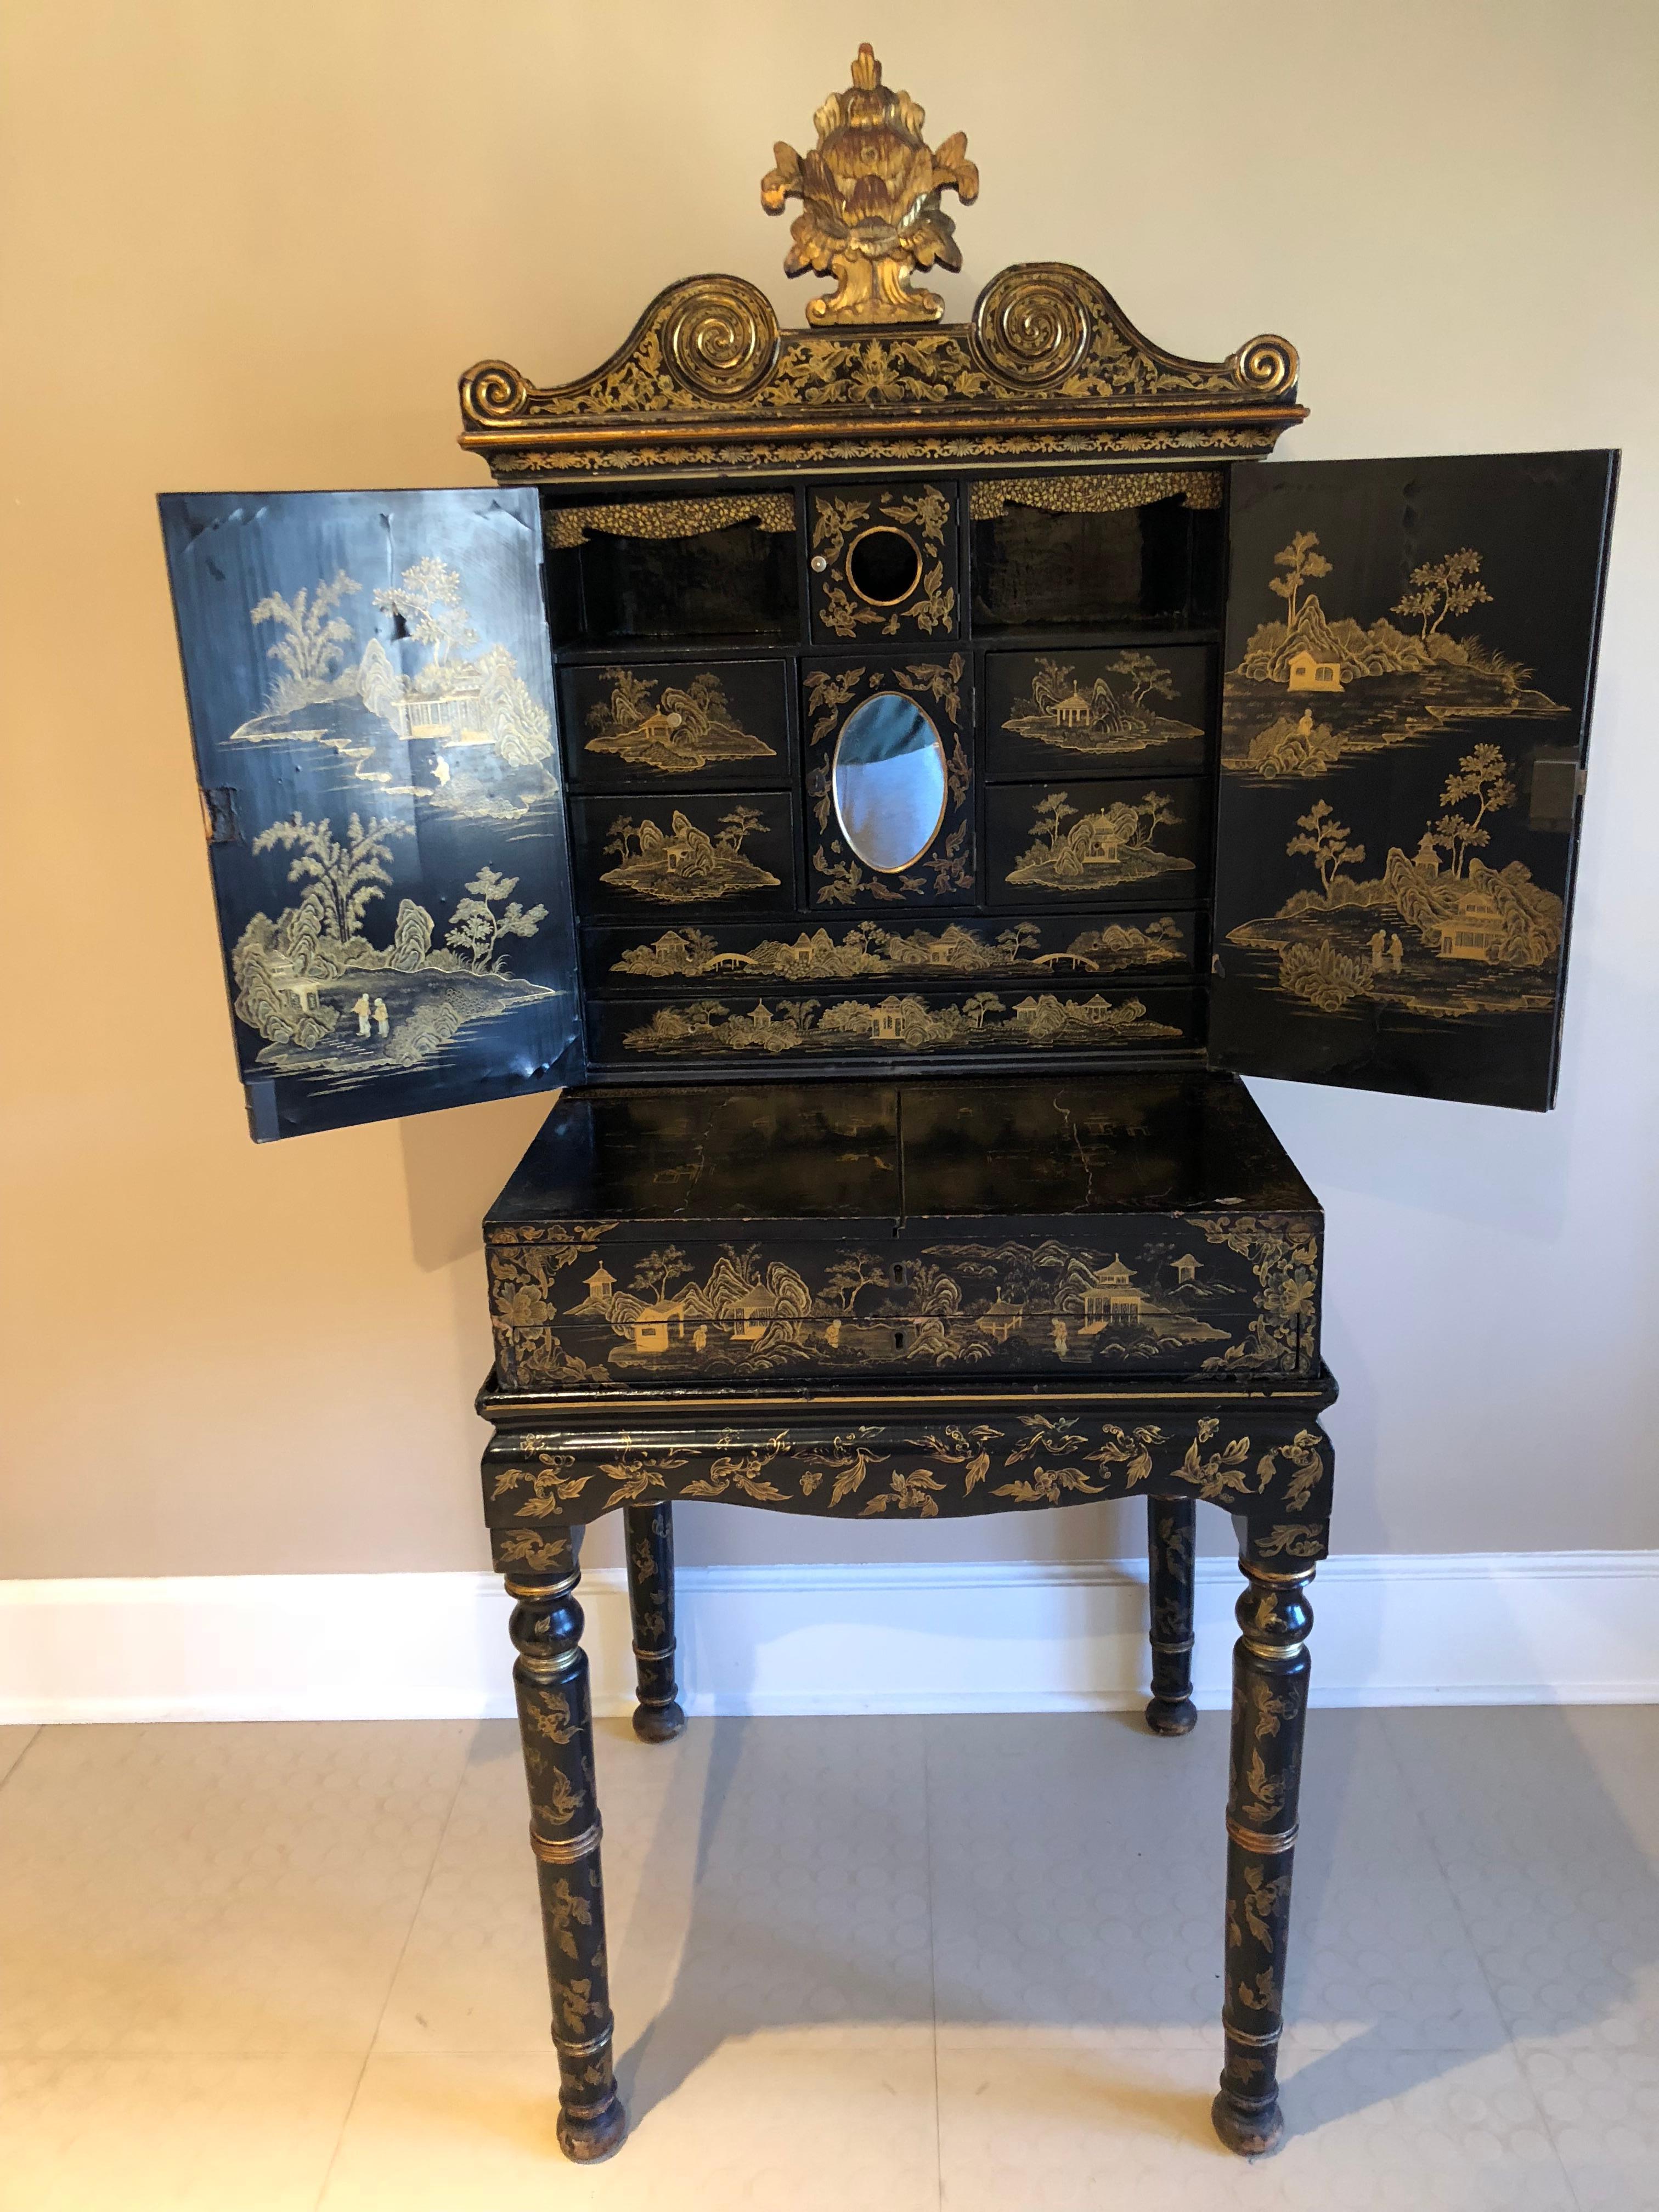 Outstanding late 19th century Chinese export gilt decorated black lacquer cabinet on stand. The detail of the gilt work on this piece is extraordinary. As shown in photos, this piece is comprised of three sections: a table base; a cabinet with